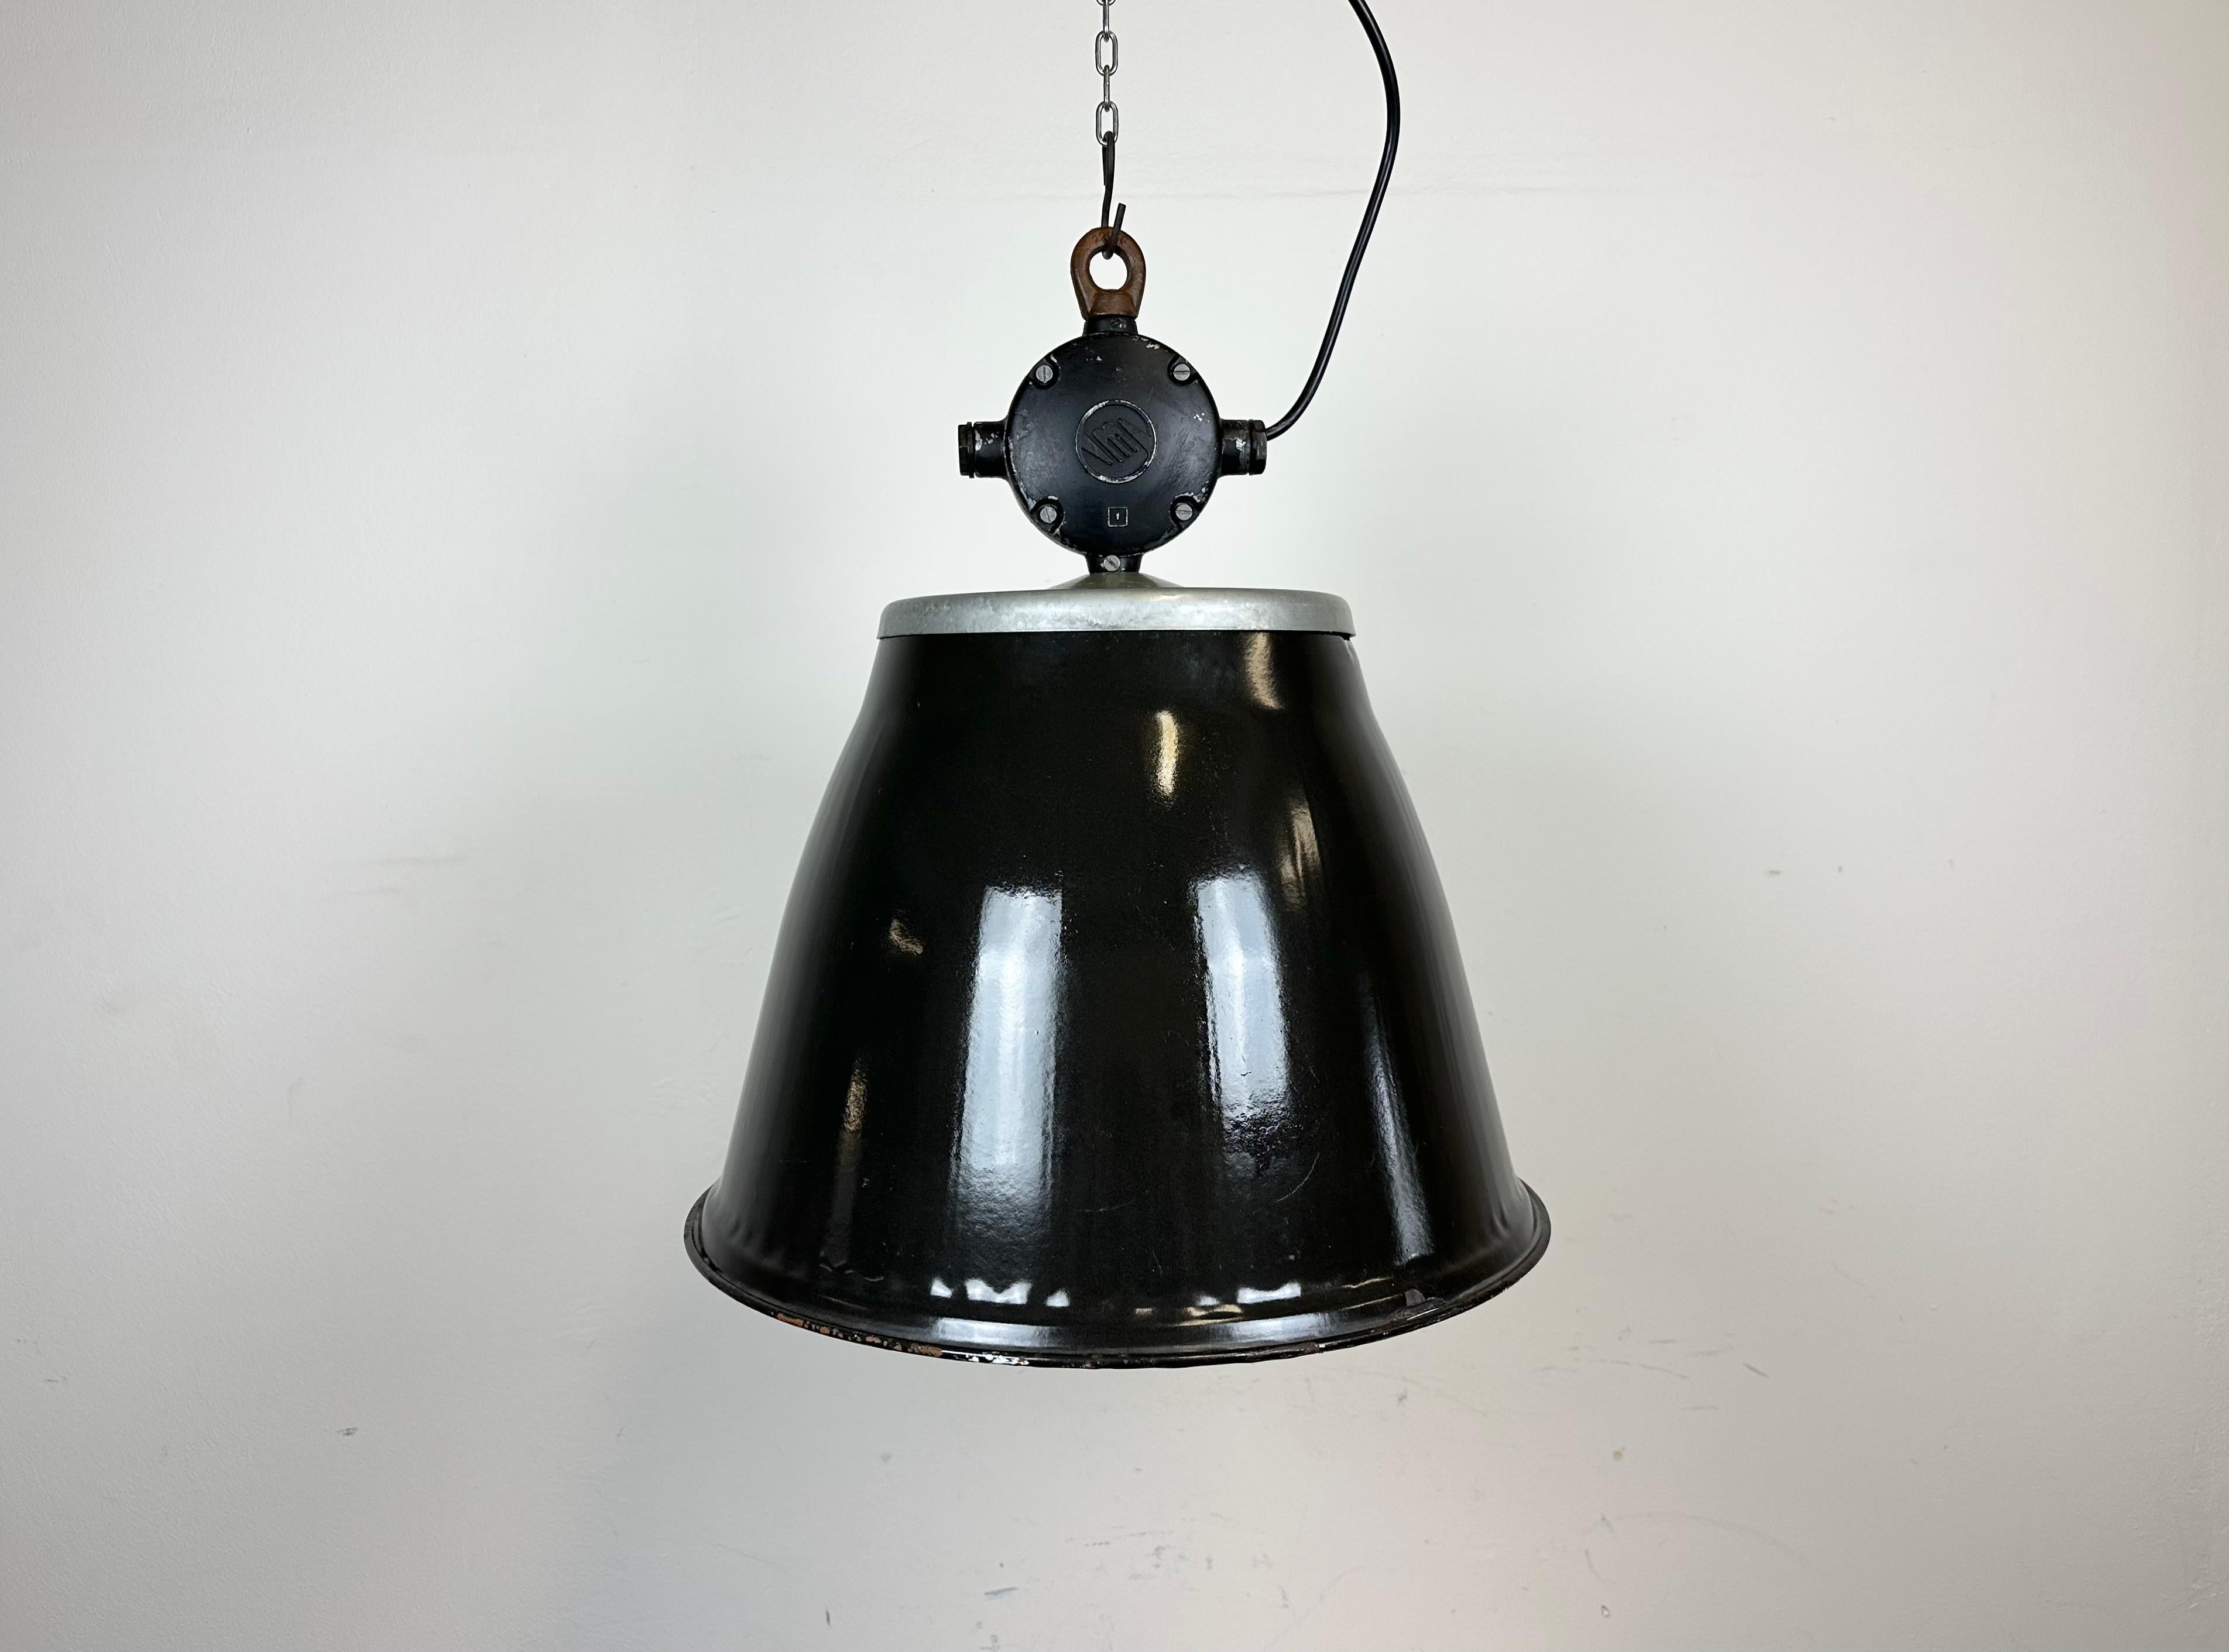 Industrial enamel hanging lamp made by Elektrosvit in former Czechoslovakia during the 1960s. It features a cast aluminium top and a black enamel shade with white interior. New porcelain socket requires standard E 27/ E 26 light bulbs. New wire. The